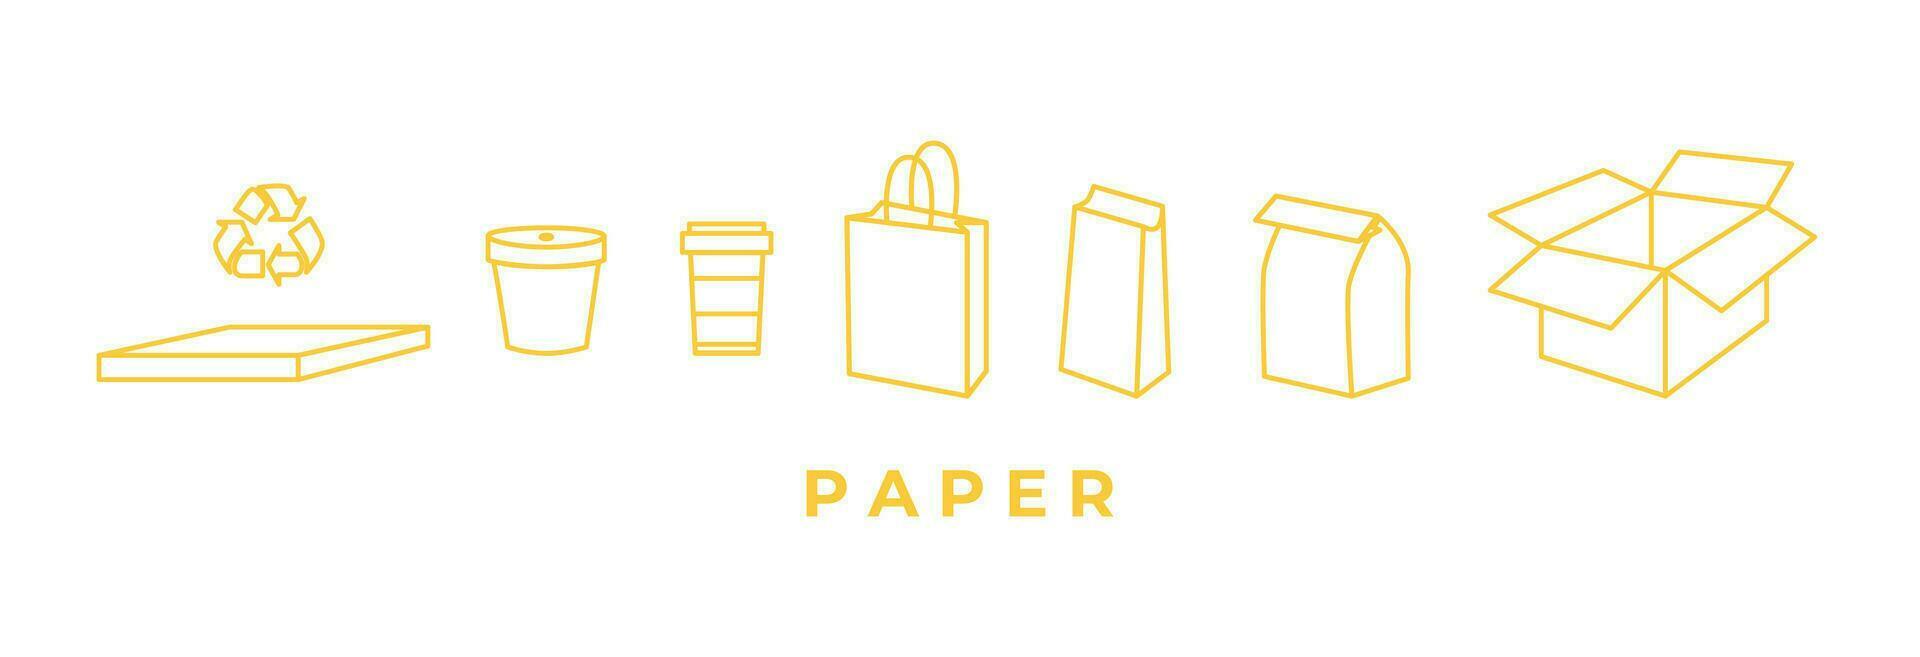 Recycling and sorting of paper waste. Pizza box, paper cup, bag, cardboard box. Linear icons. Garbage sorting and segregation. Ecology. Editable strokes. Line art, doodles. vector